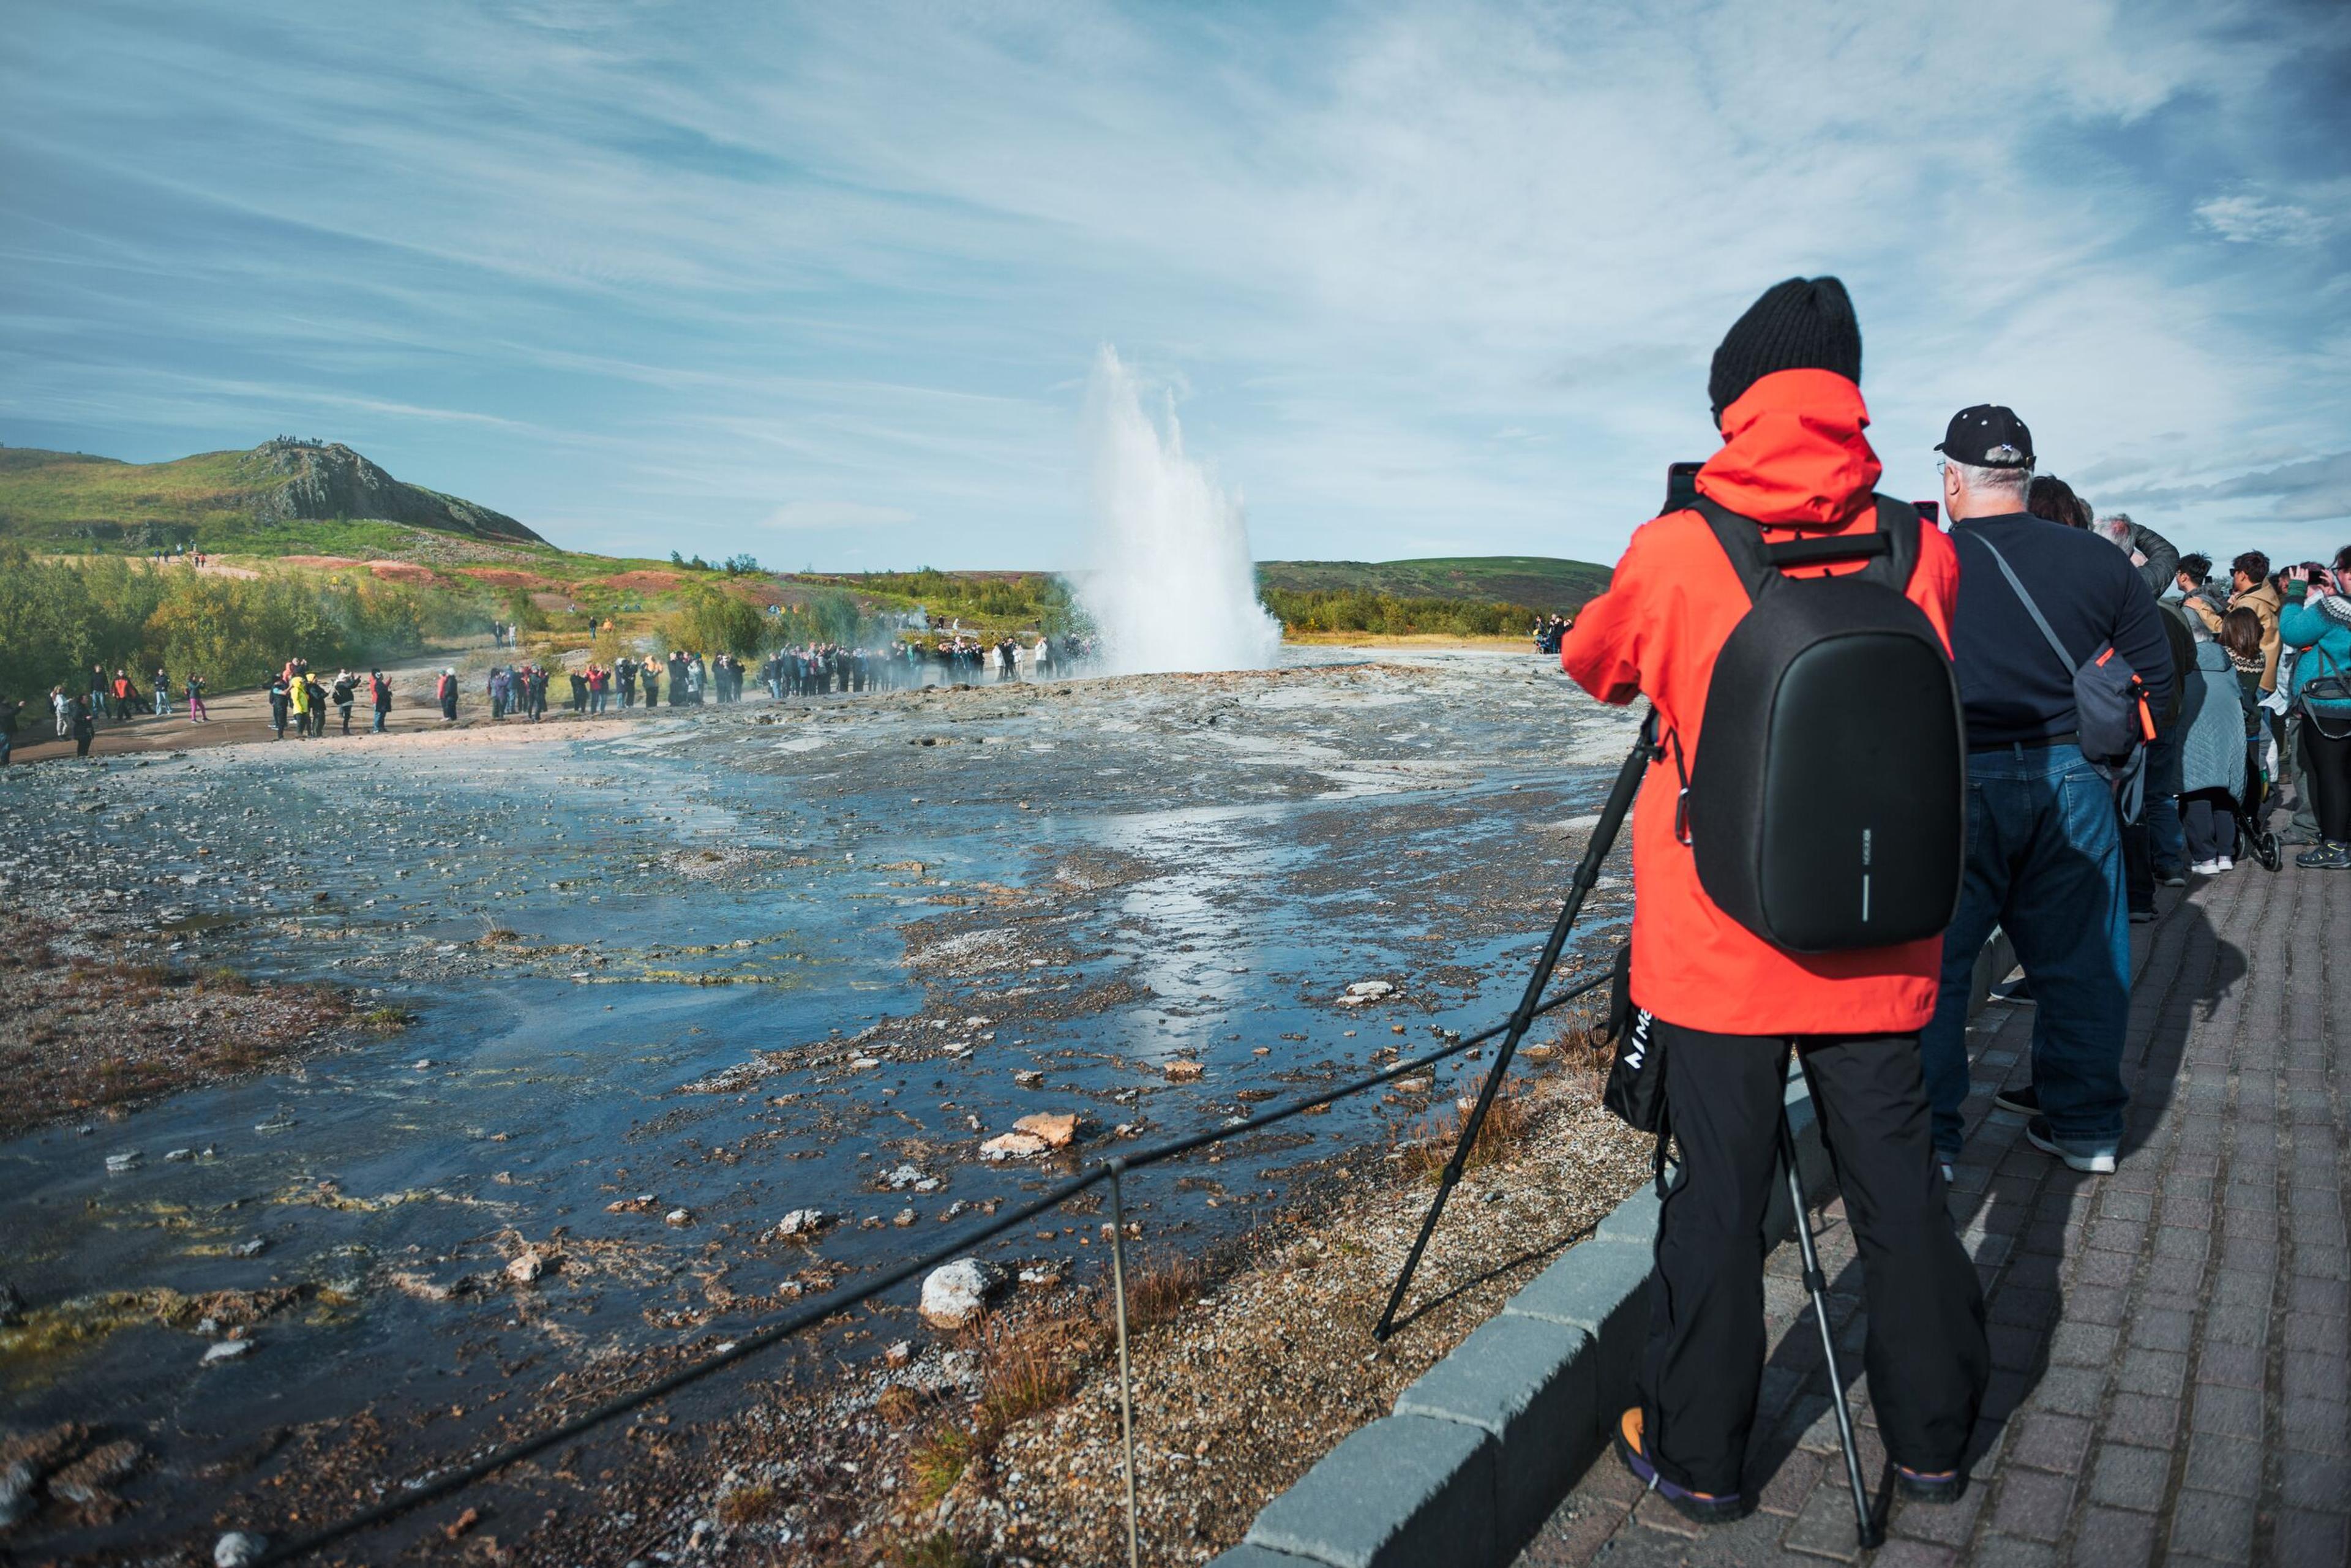 A visitor clad in a red jacket with a camera on a tripod observes a geyser erupting in Iceland, while a crowd of tourists at a distance watches the natural spectacle under a clear blue sky.